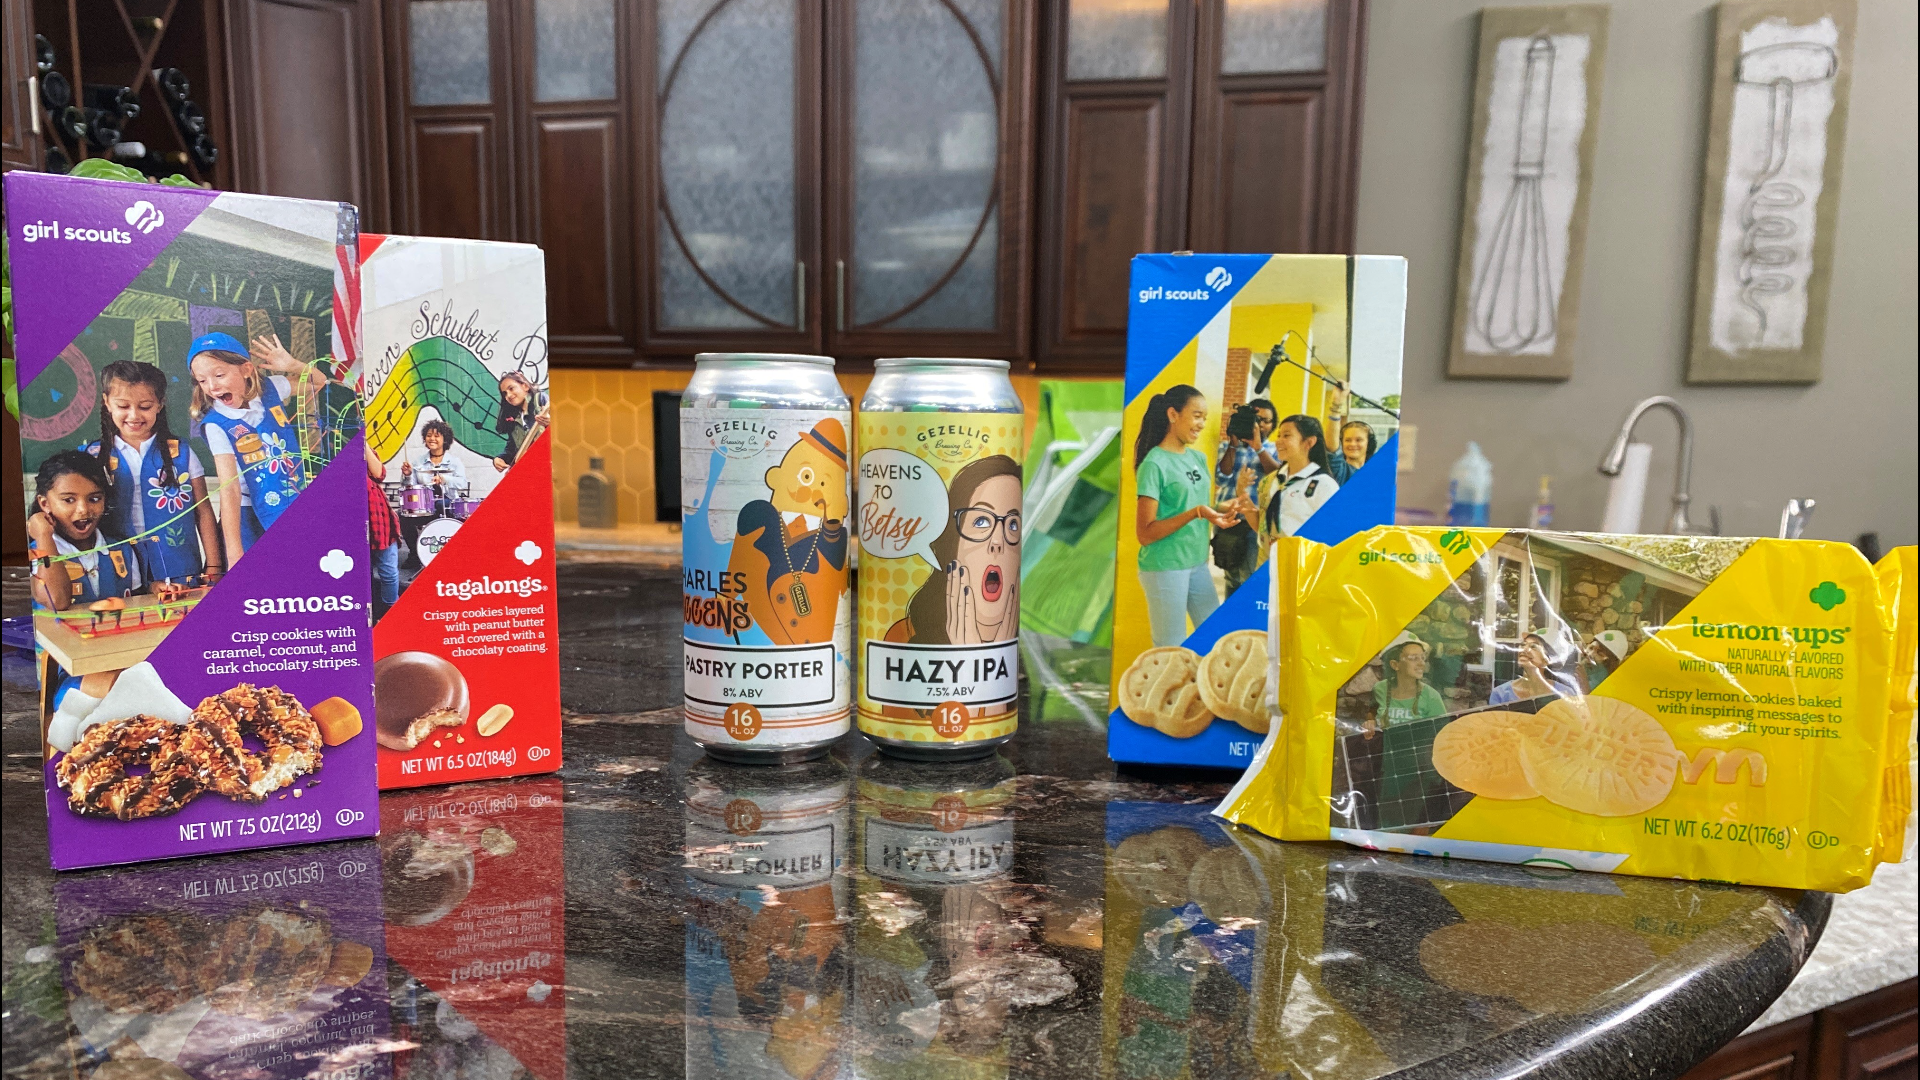 Good Morning Quad Cities at 11 a.m. paired different Girl Scout cookies with a porter and IPA.